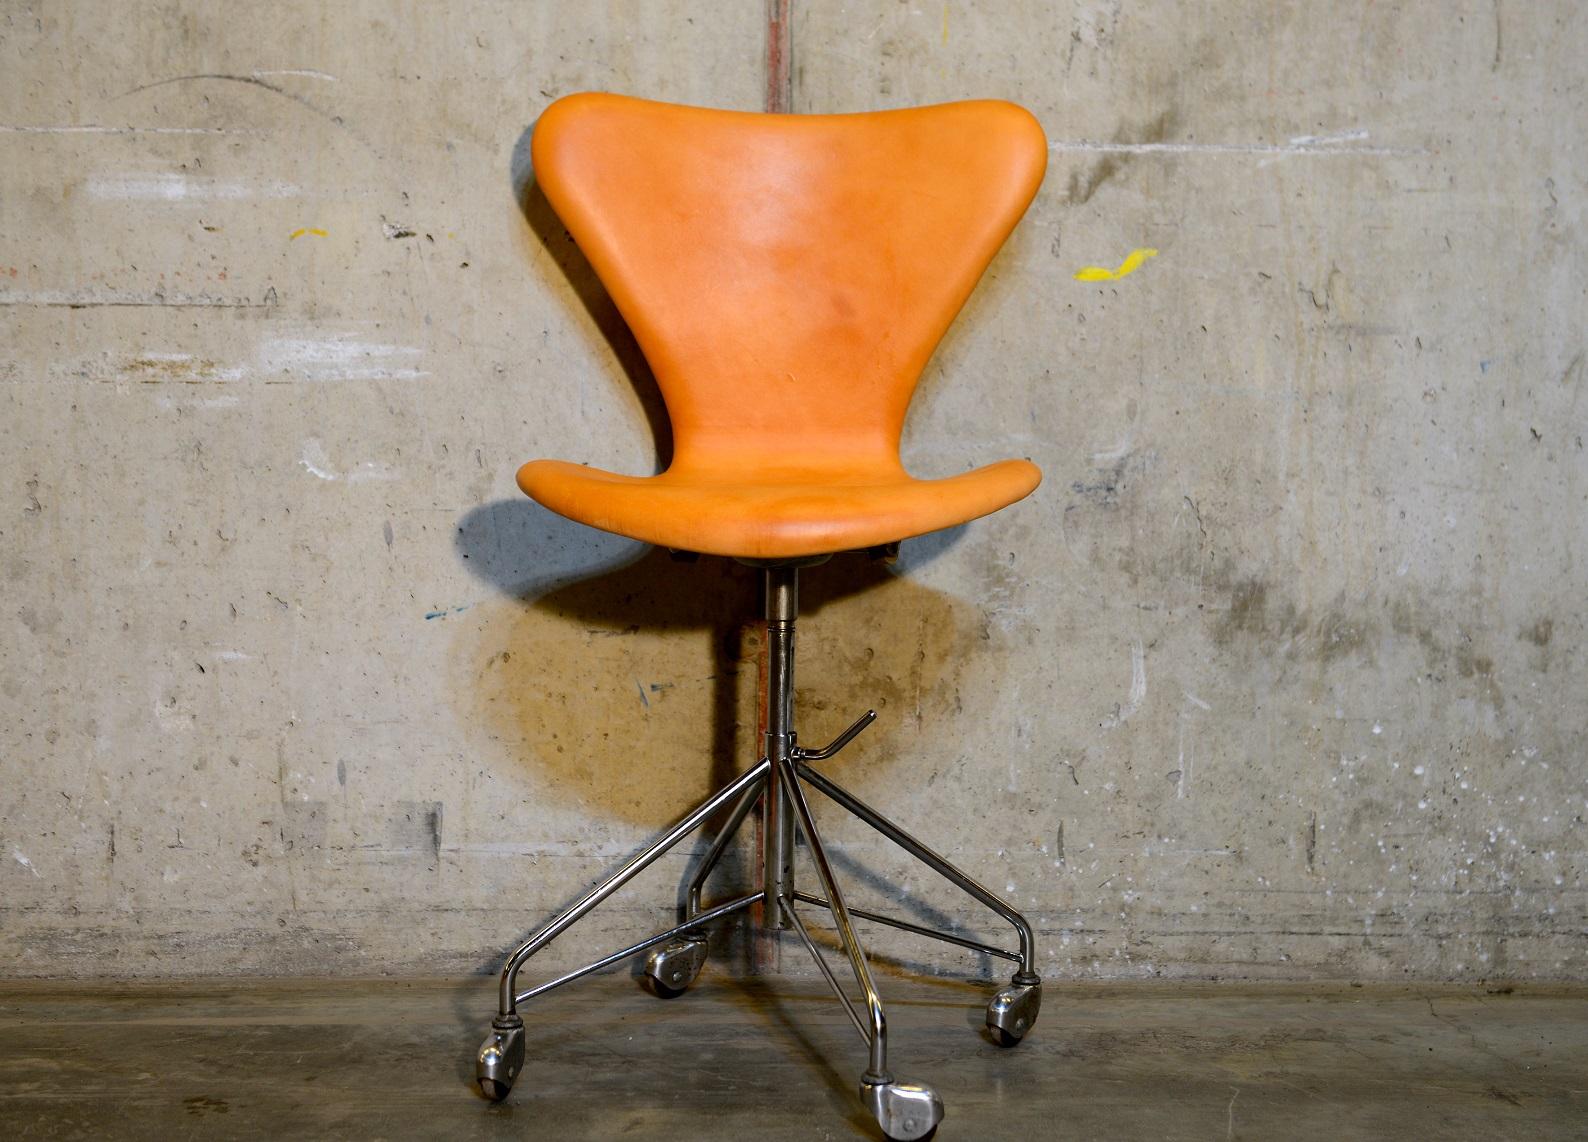 Vintage Series 7 Office chair/Desk Chair/Swivel Chair. Re-upholstered with leather from Swedish Tärnsjö Tannery. Designed by Arne Jacobsen and produced by Fritz Hansen in Denmark. This piece is from the early production. Height-adjustable.

This